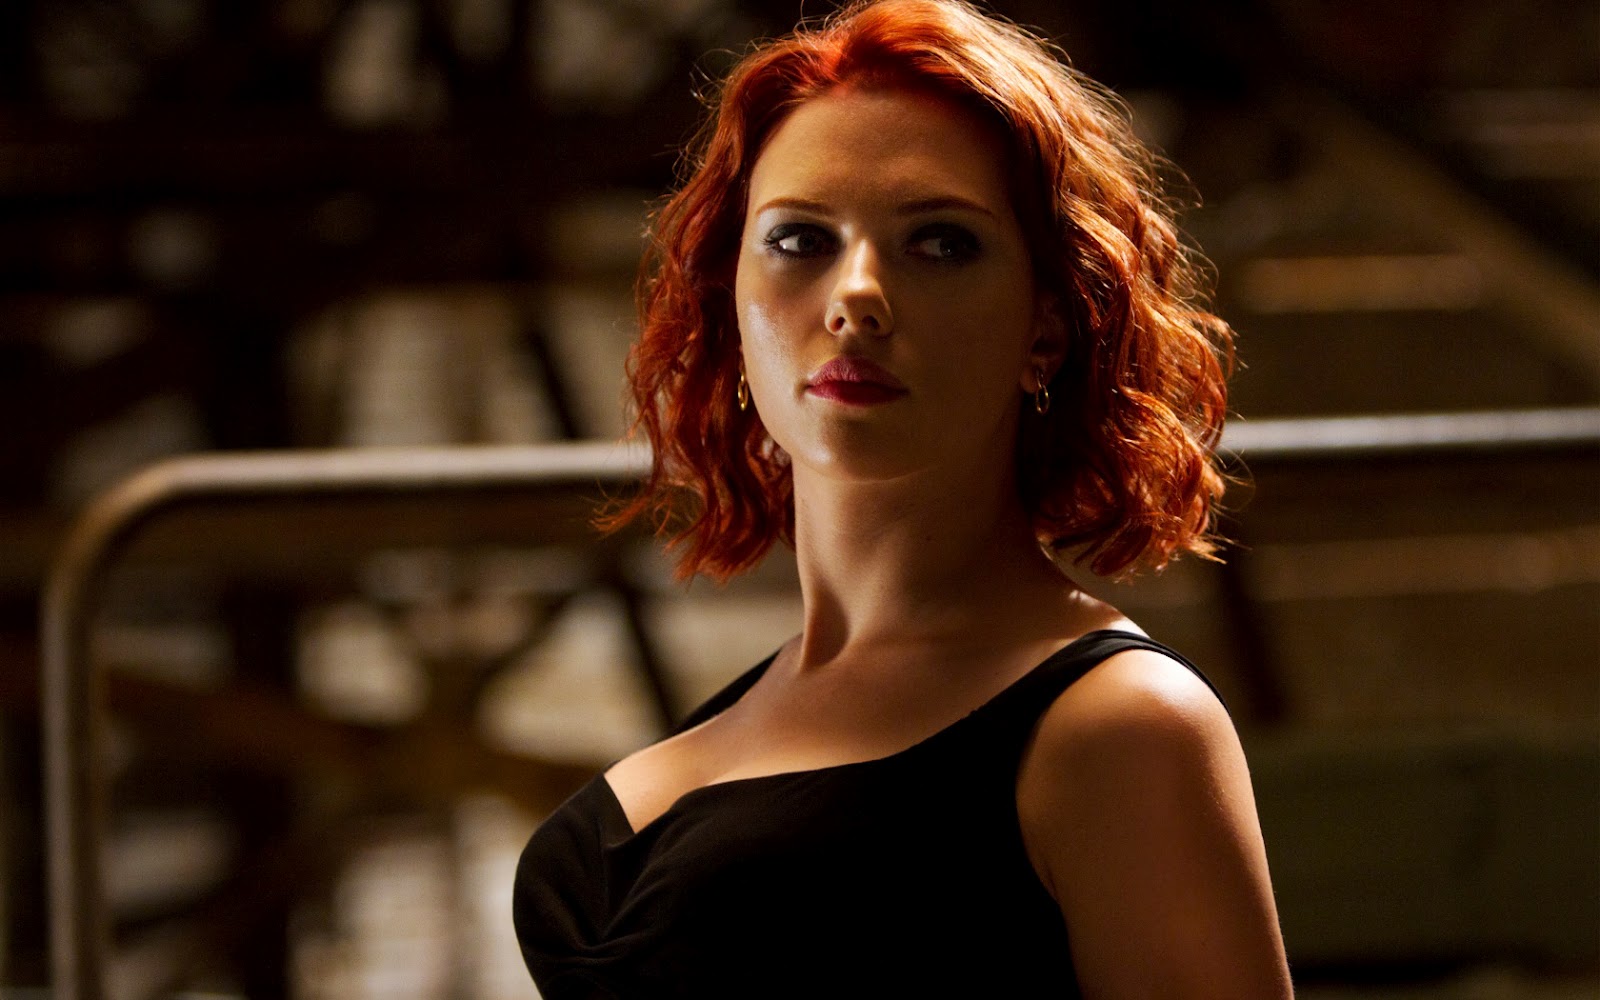  Black Widow HD Wallpapers Download Wallpapers in HD for your 1600x1000